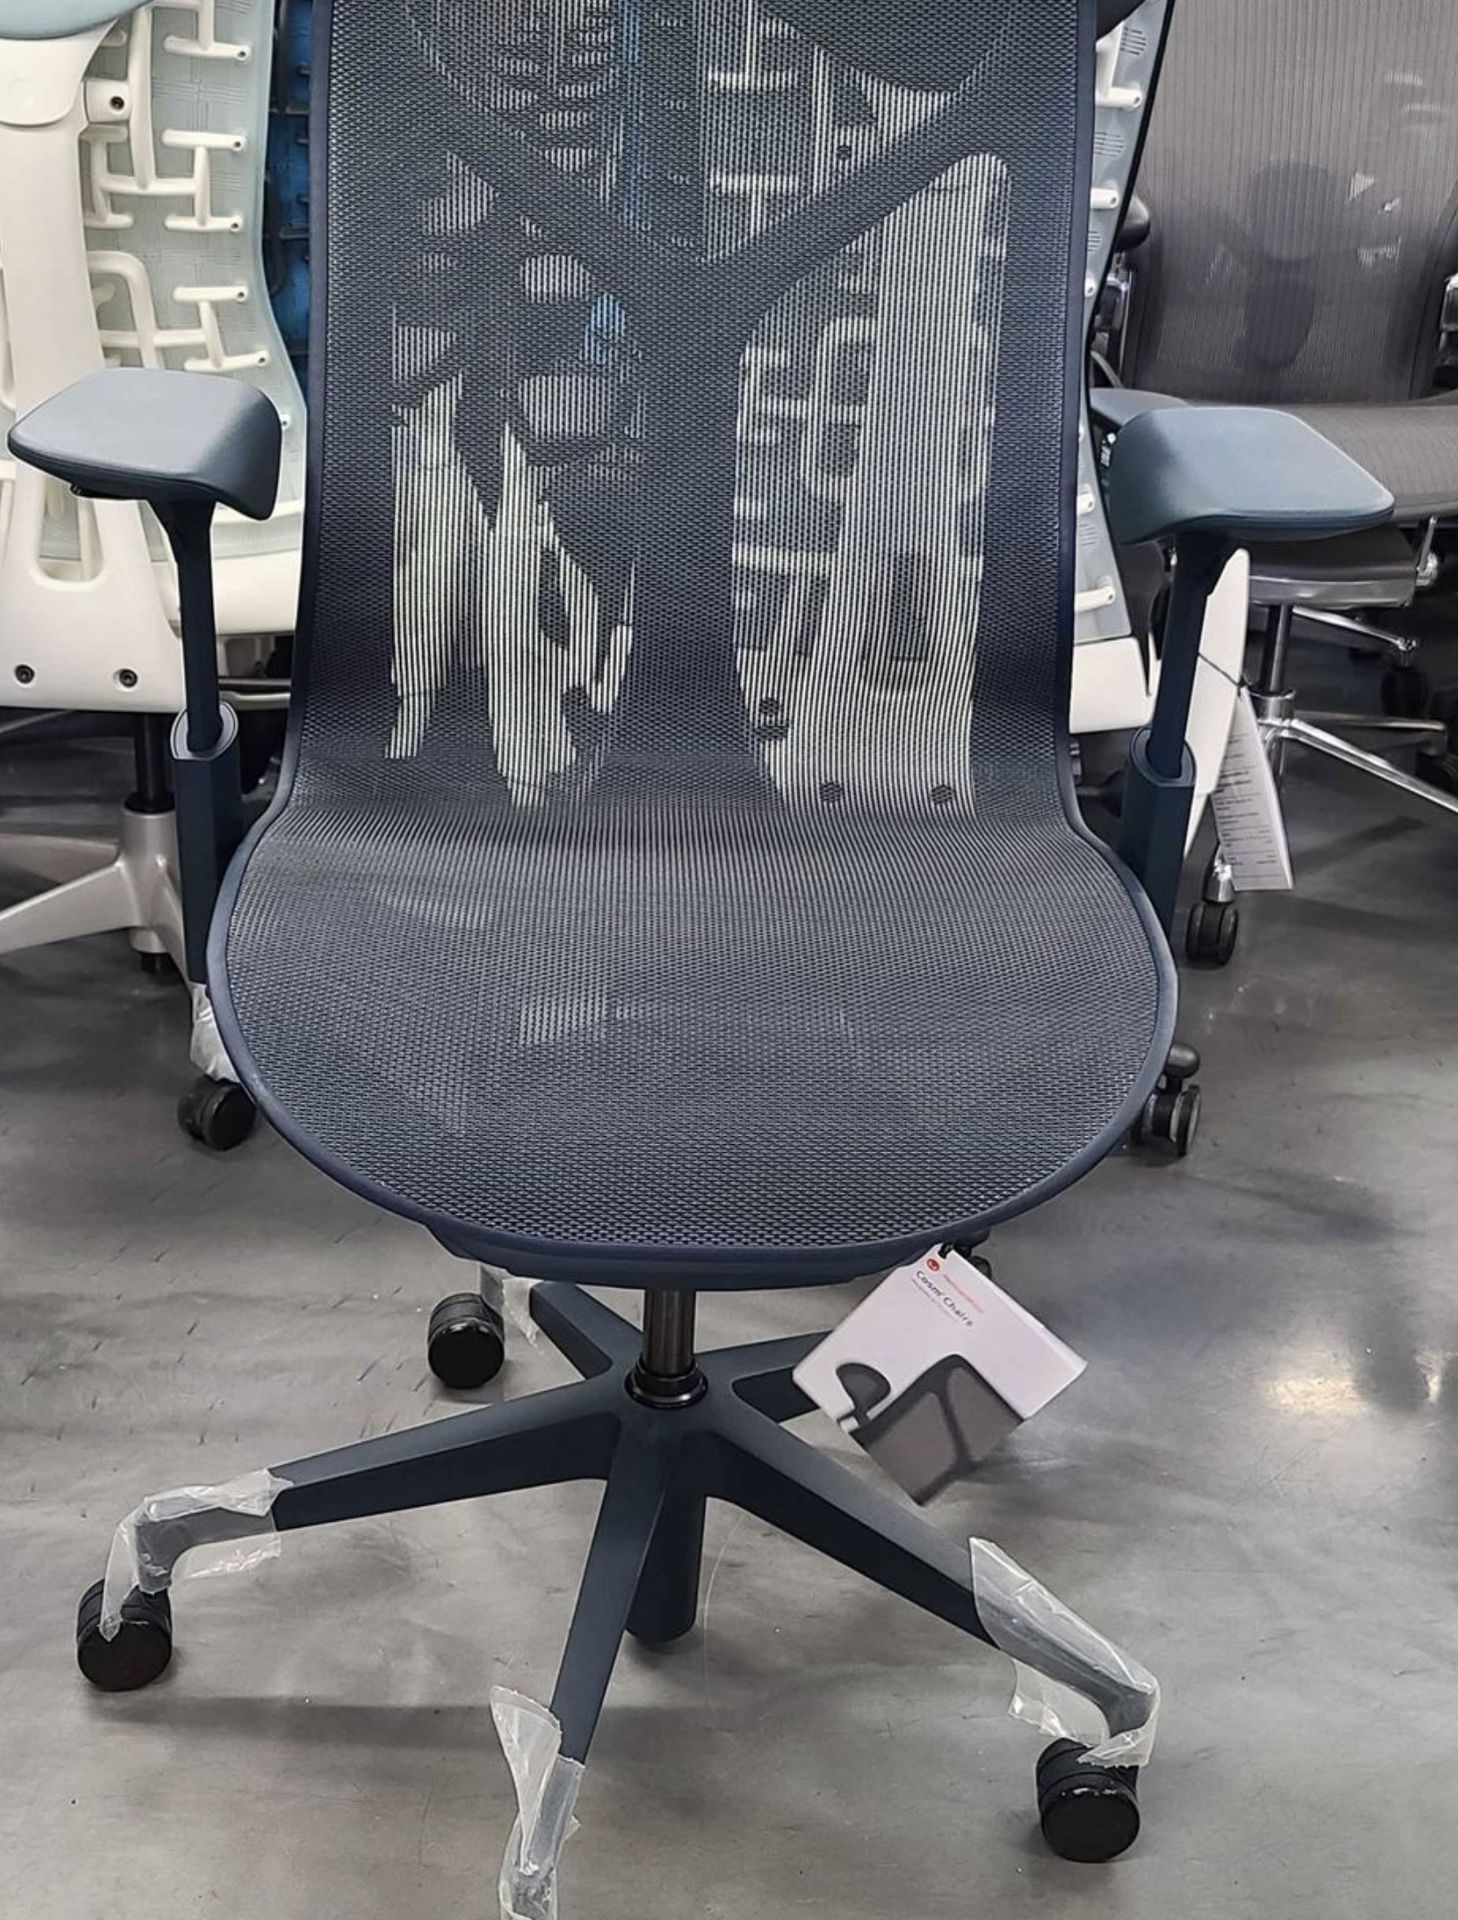 🔥BRAND NEW🔥HERMAN MILLER COSM HIGH BACK CHAIR NIGHTFALL COLORS MESH DESIGNED BY STUDIO 7.5 BEAUTIFUL & COMFORTABLE WITH ADJUSTABLE ARMS